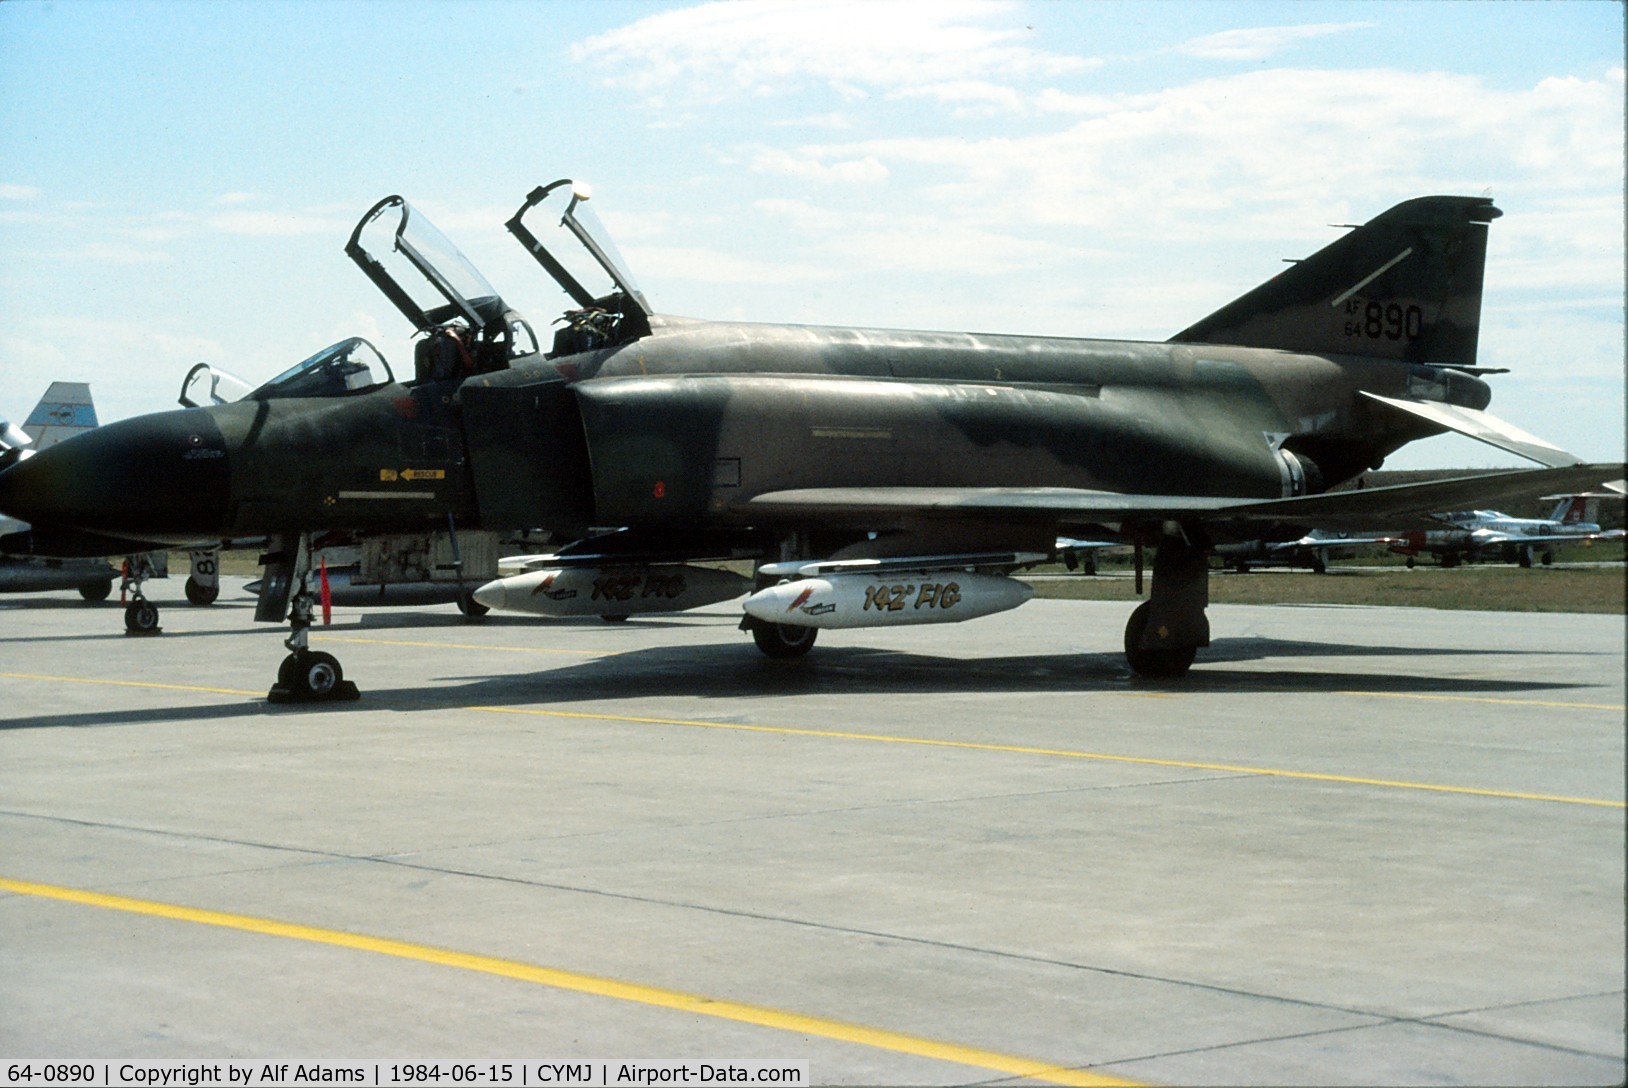 64-0890, 1964 McDonnell F-4C Phantom II C/N 1304, At the airshow at Canadian Forces Base Moose Jaw, Saskatchewan in June 1984.